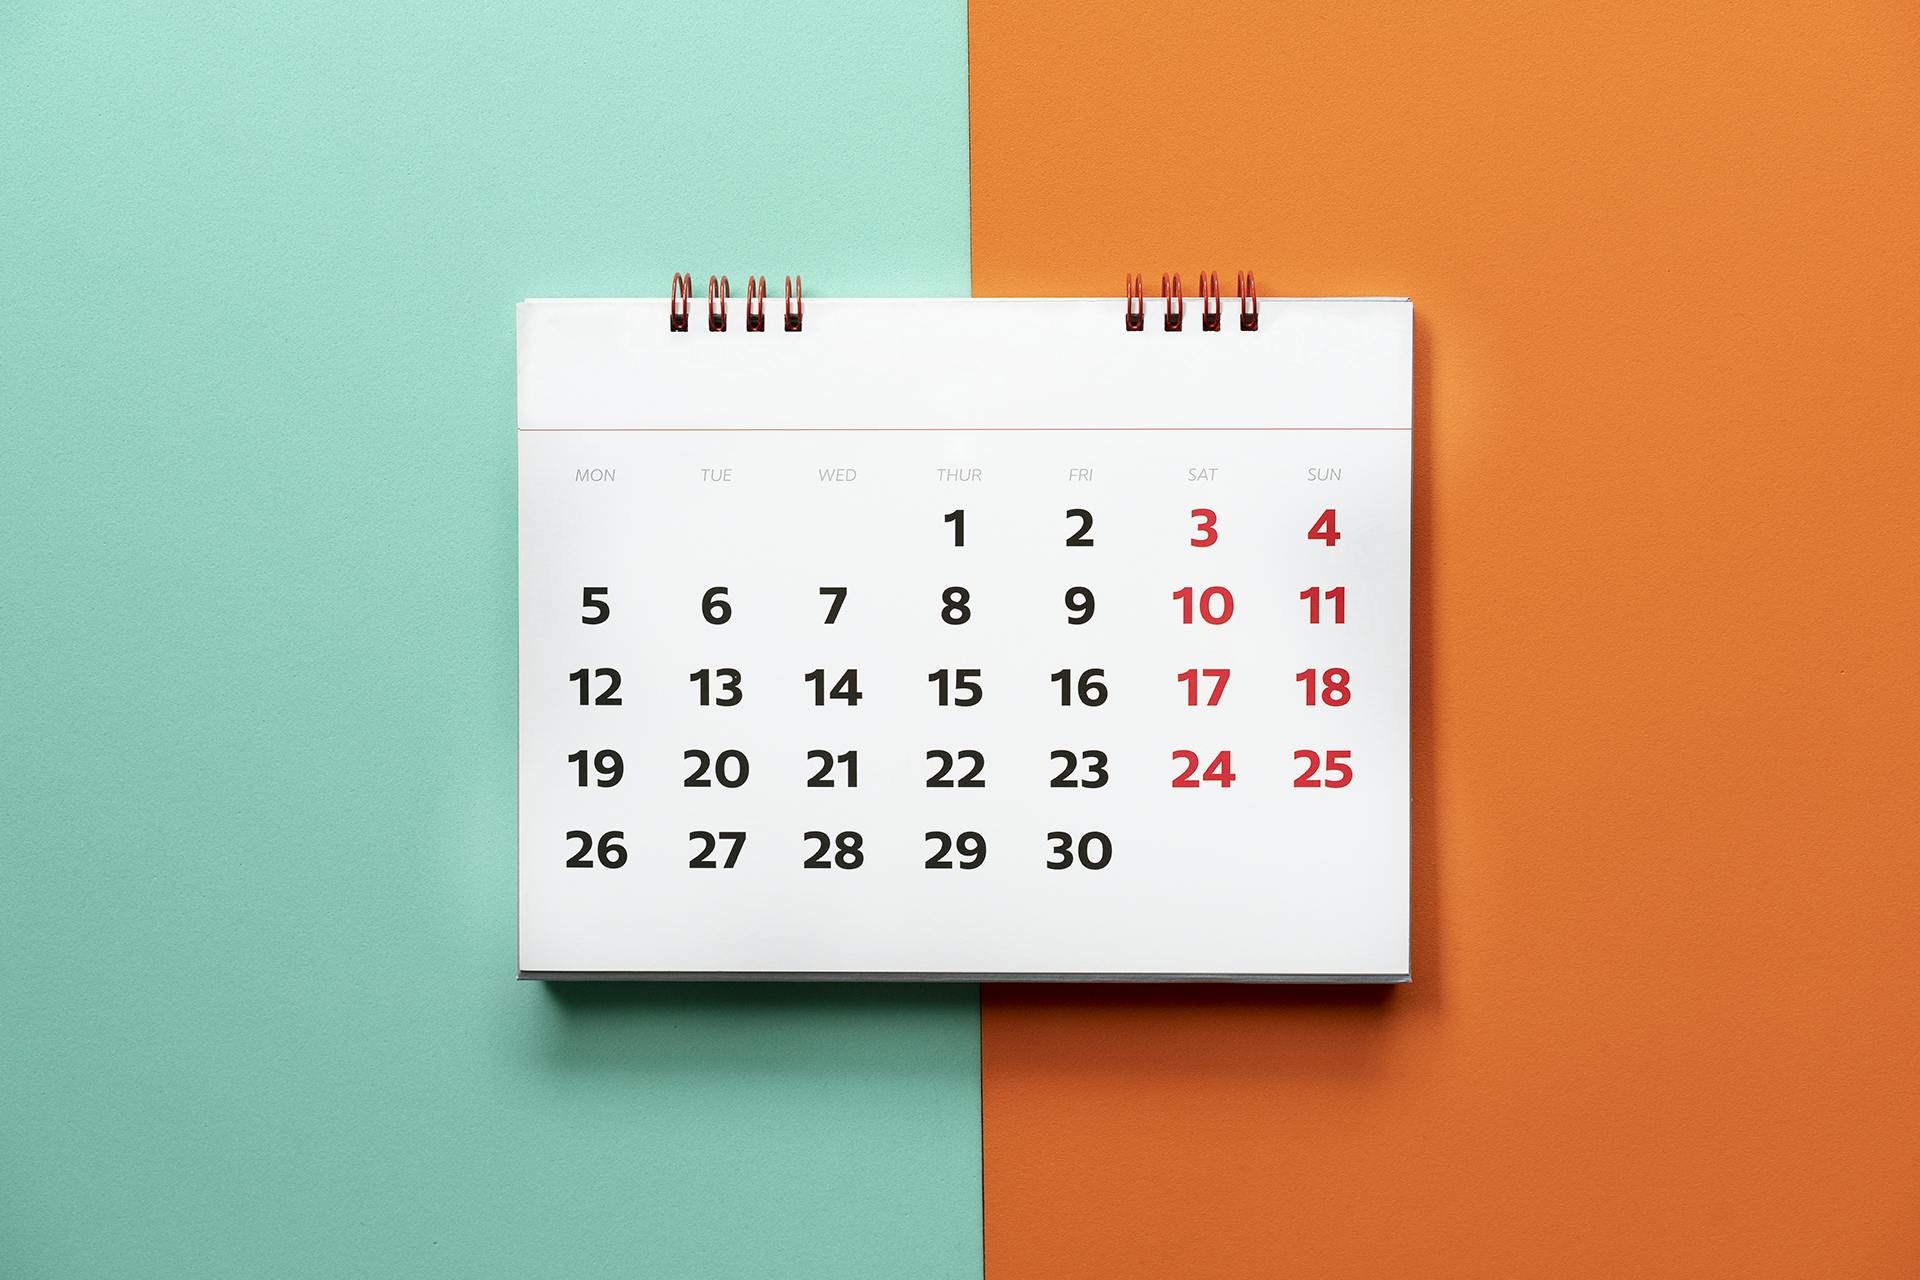 green and orange background with a calendar in the foreground